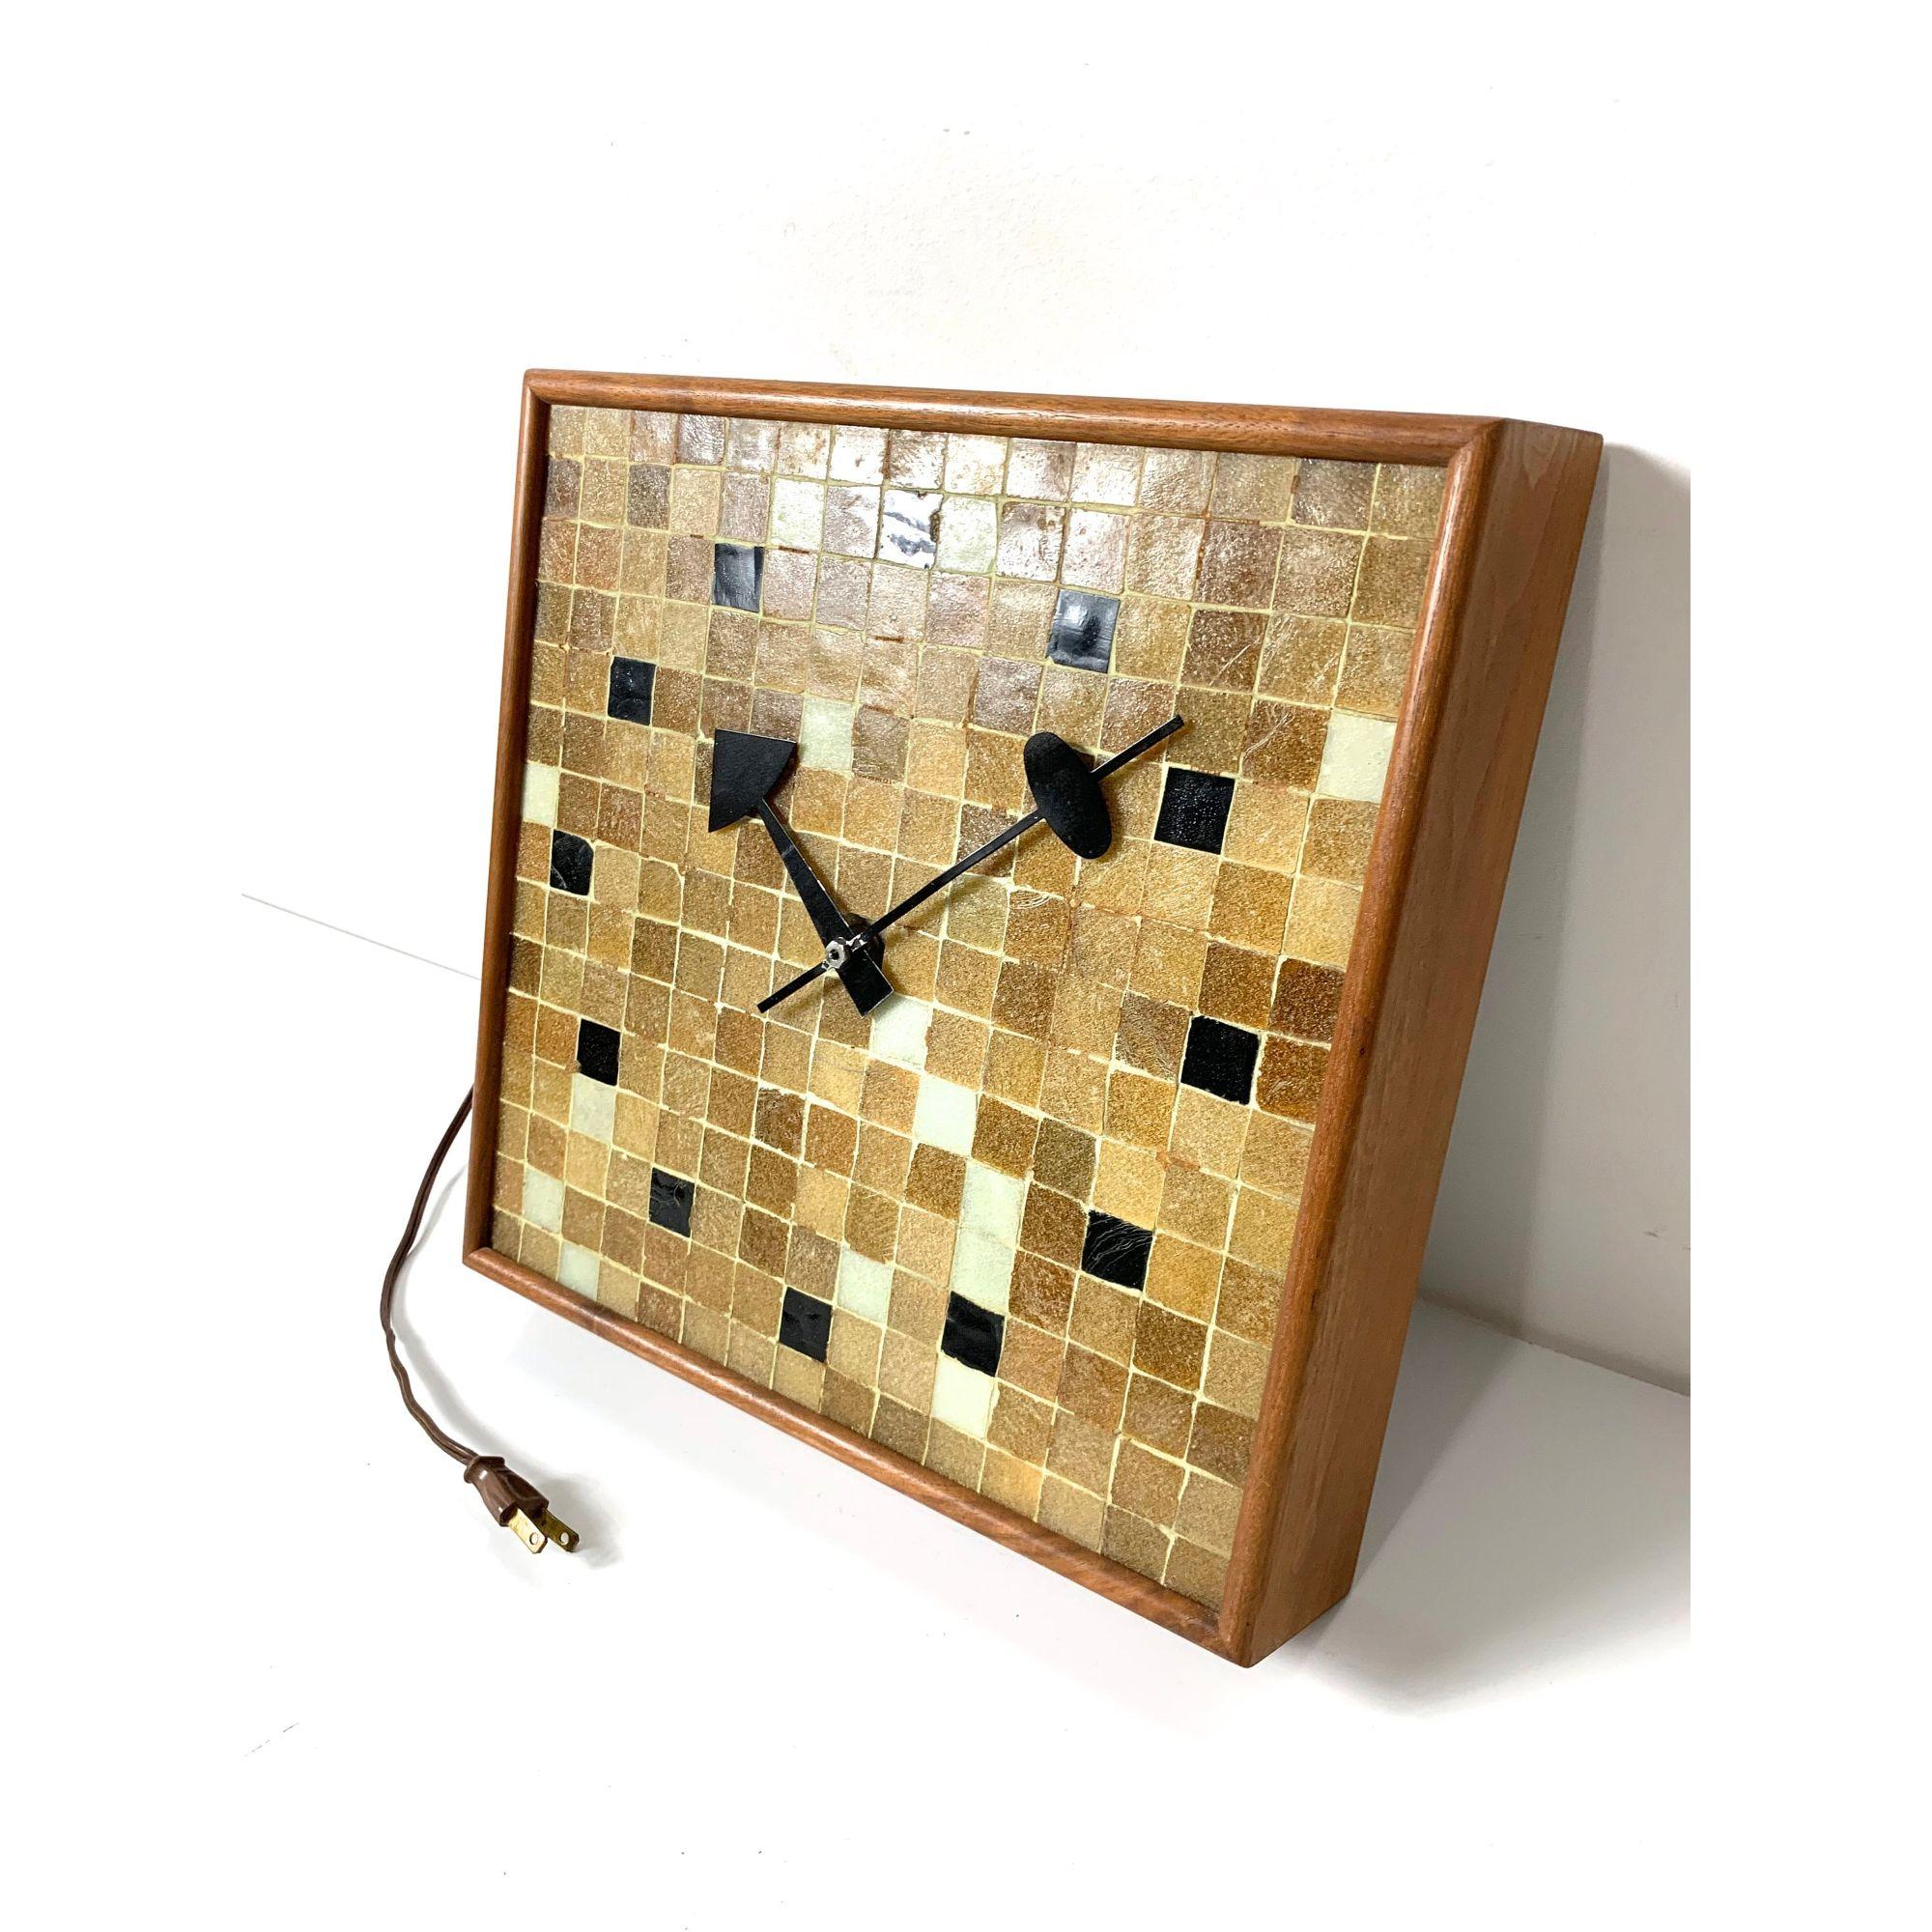 Rare George Nelson And Associates Mosaic Tile Wall Clock 

Designed by Irving Harper for George Nelson and Associates and produced by Howard Miller
Model 2232 
1957
Walnut frame with glass mosaic tile face and classic black hands

Additional